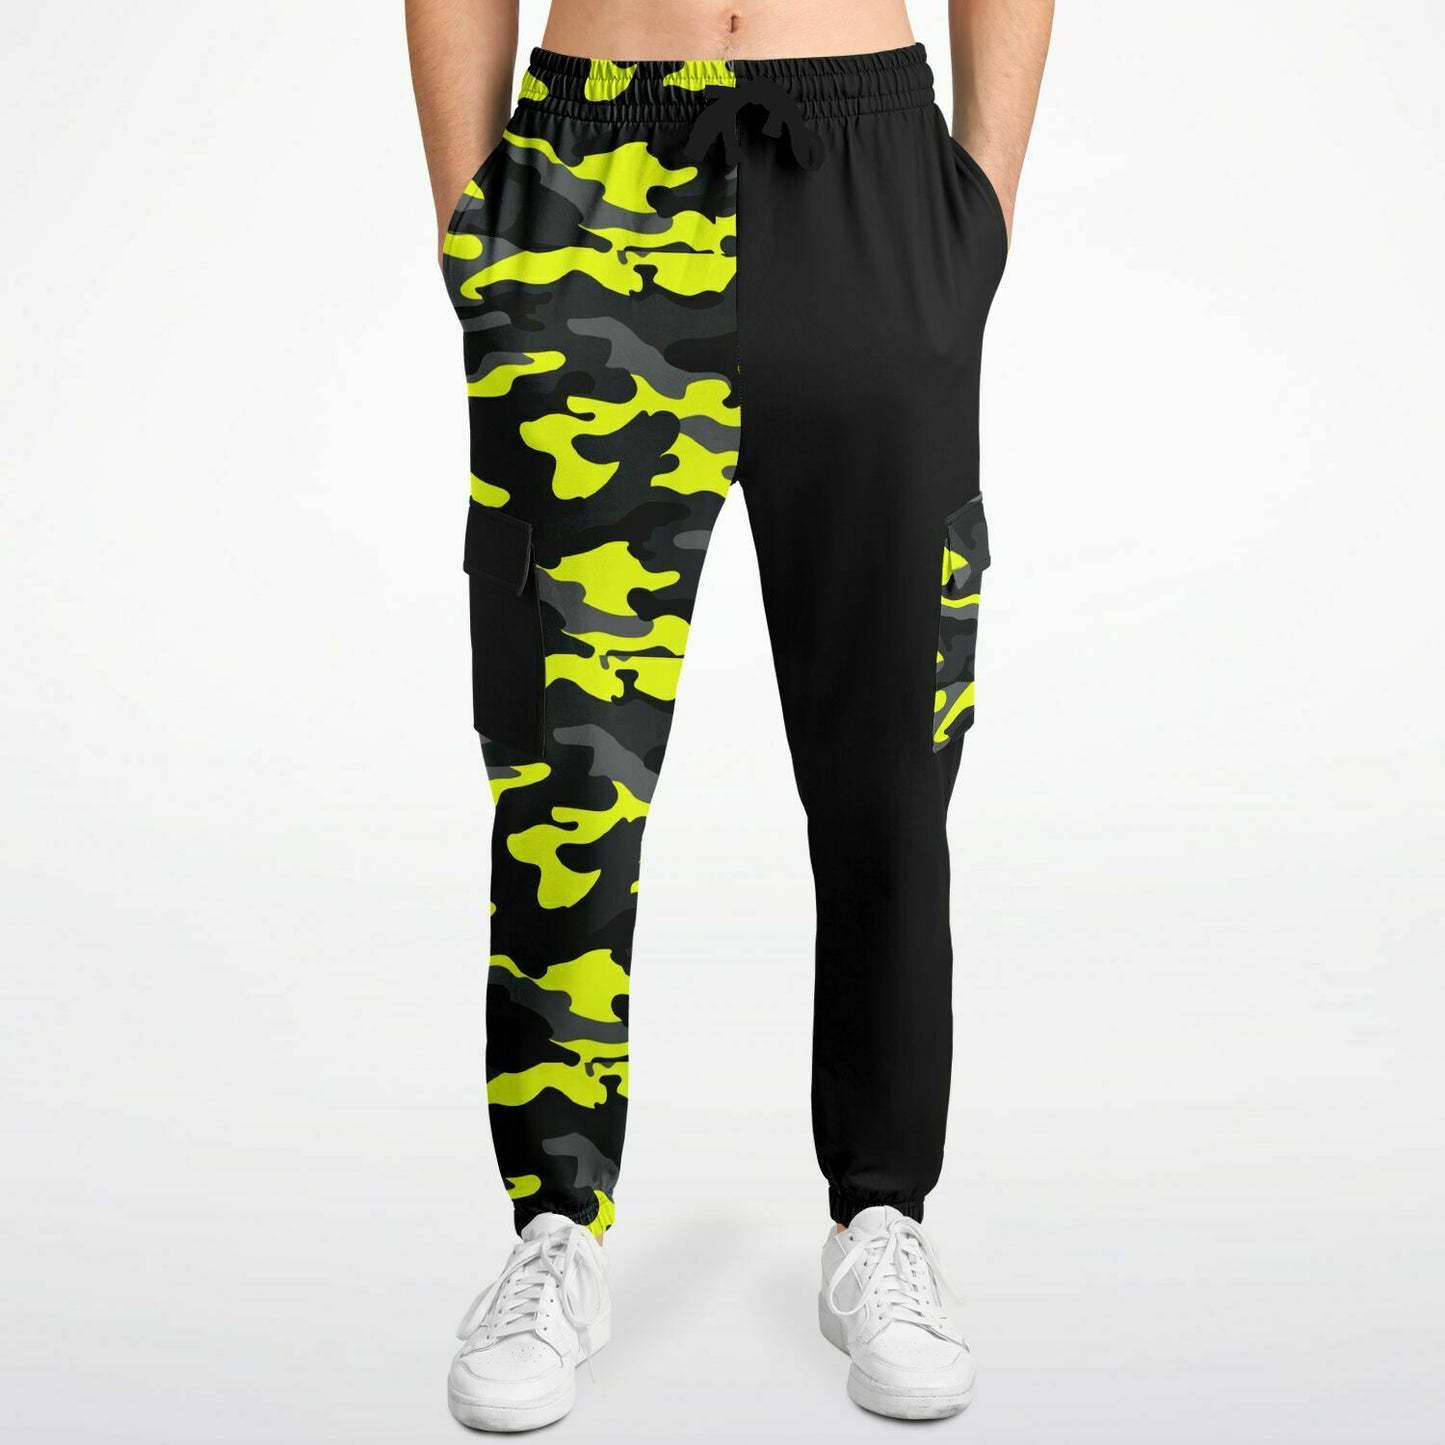 (A) Yellow Camouflage Two Tone Sweatpants